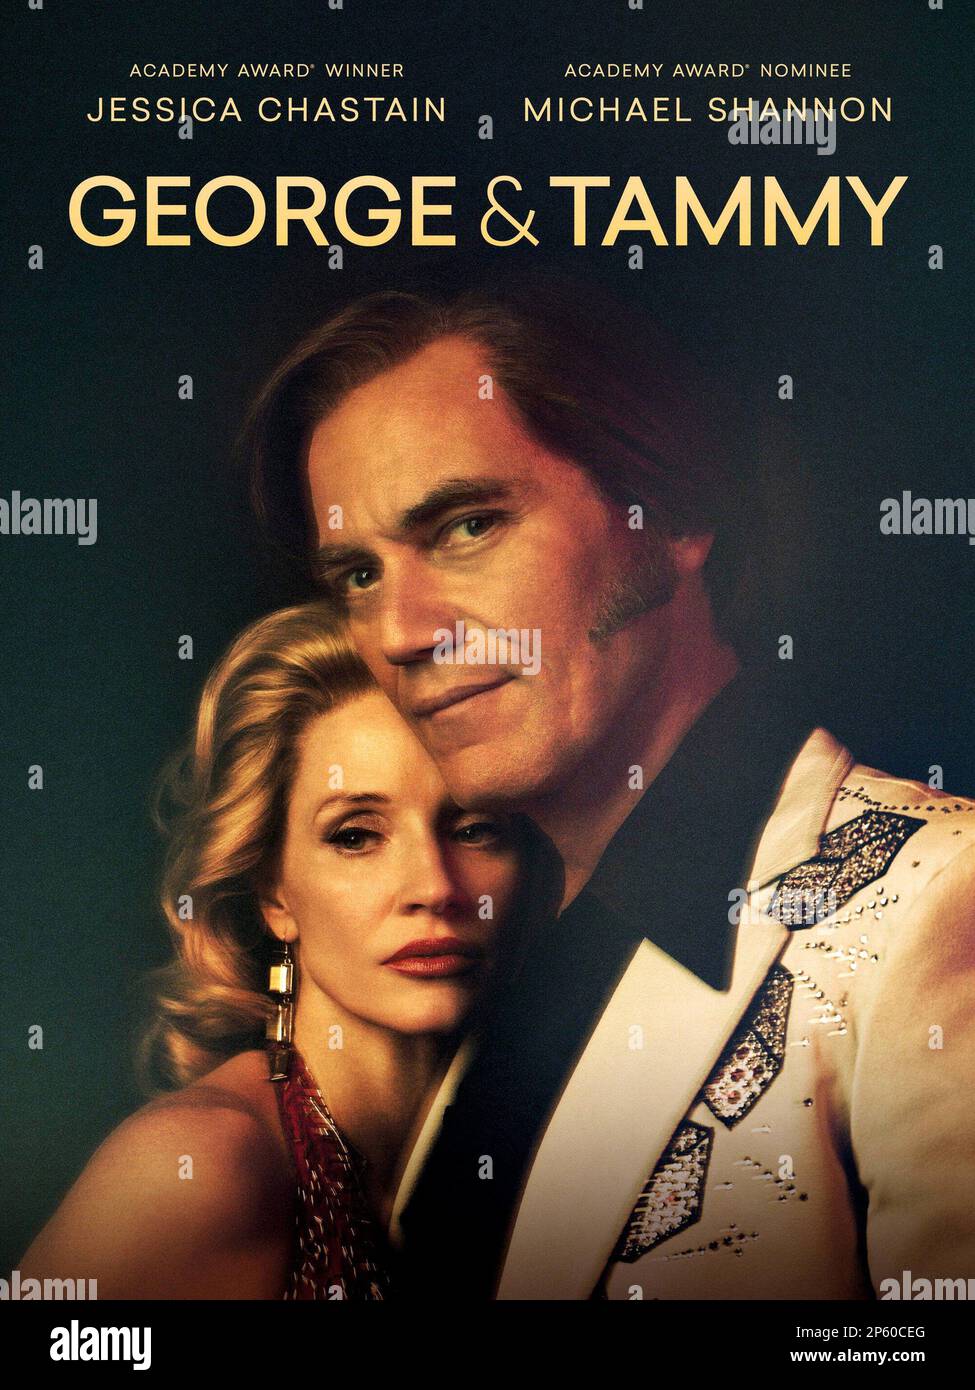 George and Tammy poster  Jessica Chastain & Michael Shannon Stock Photo